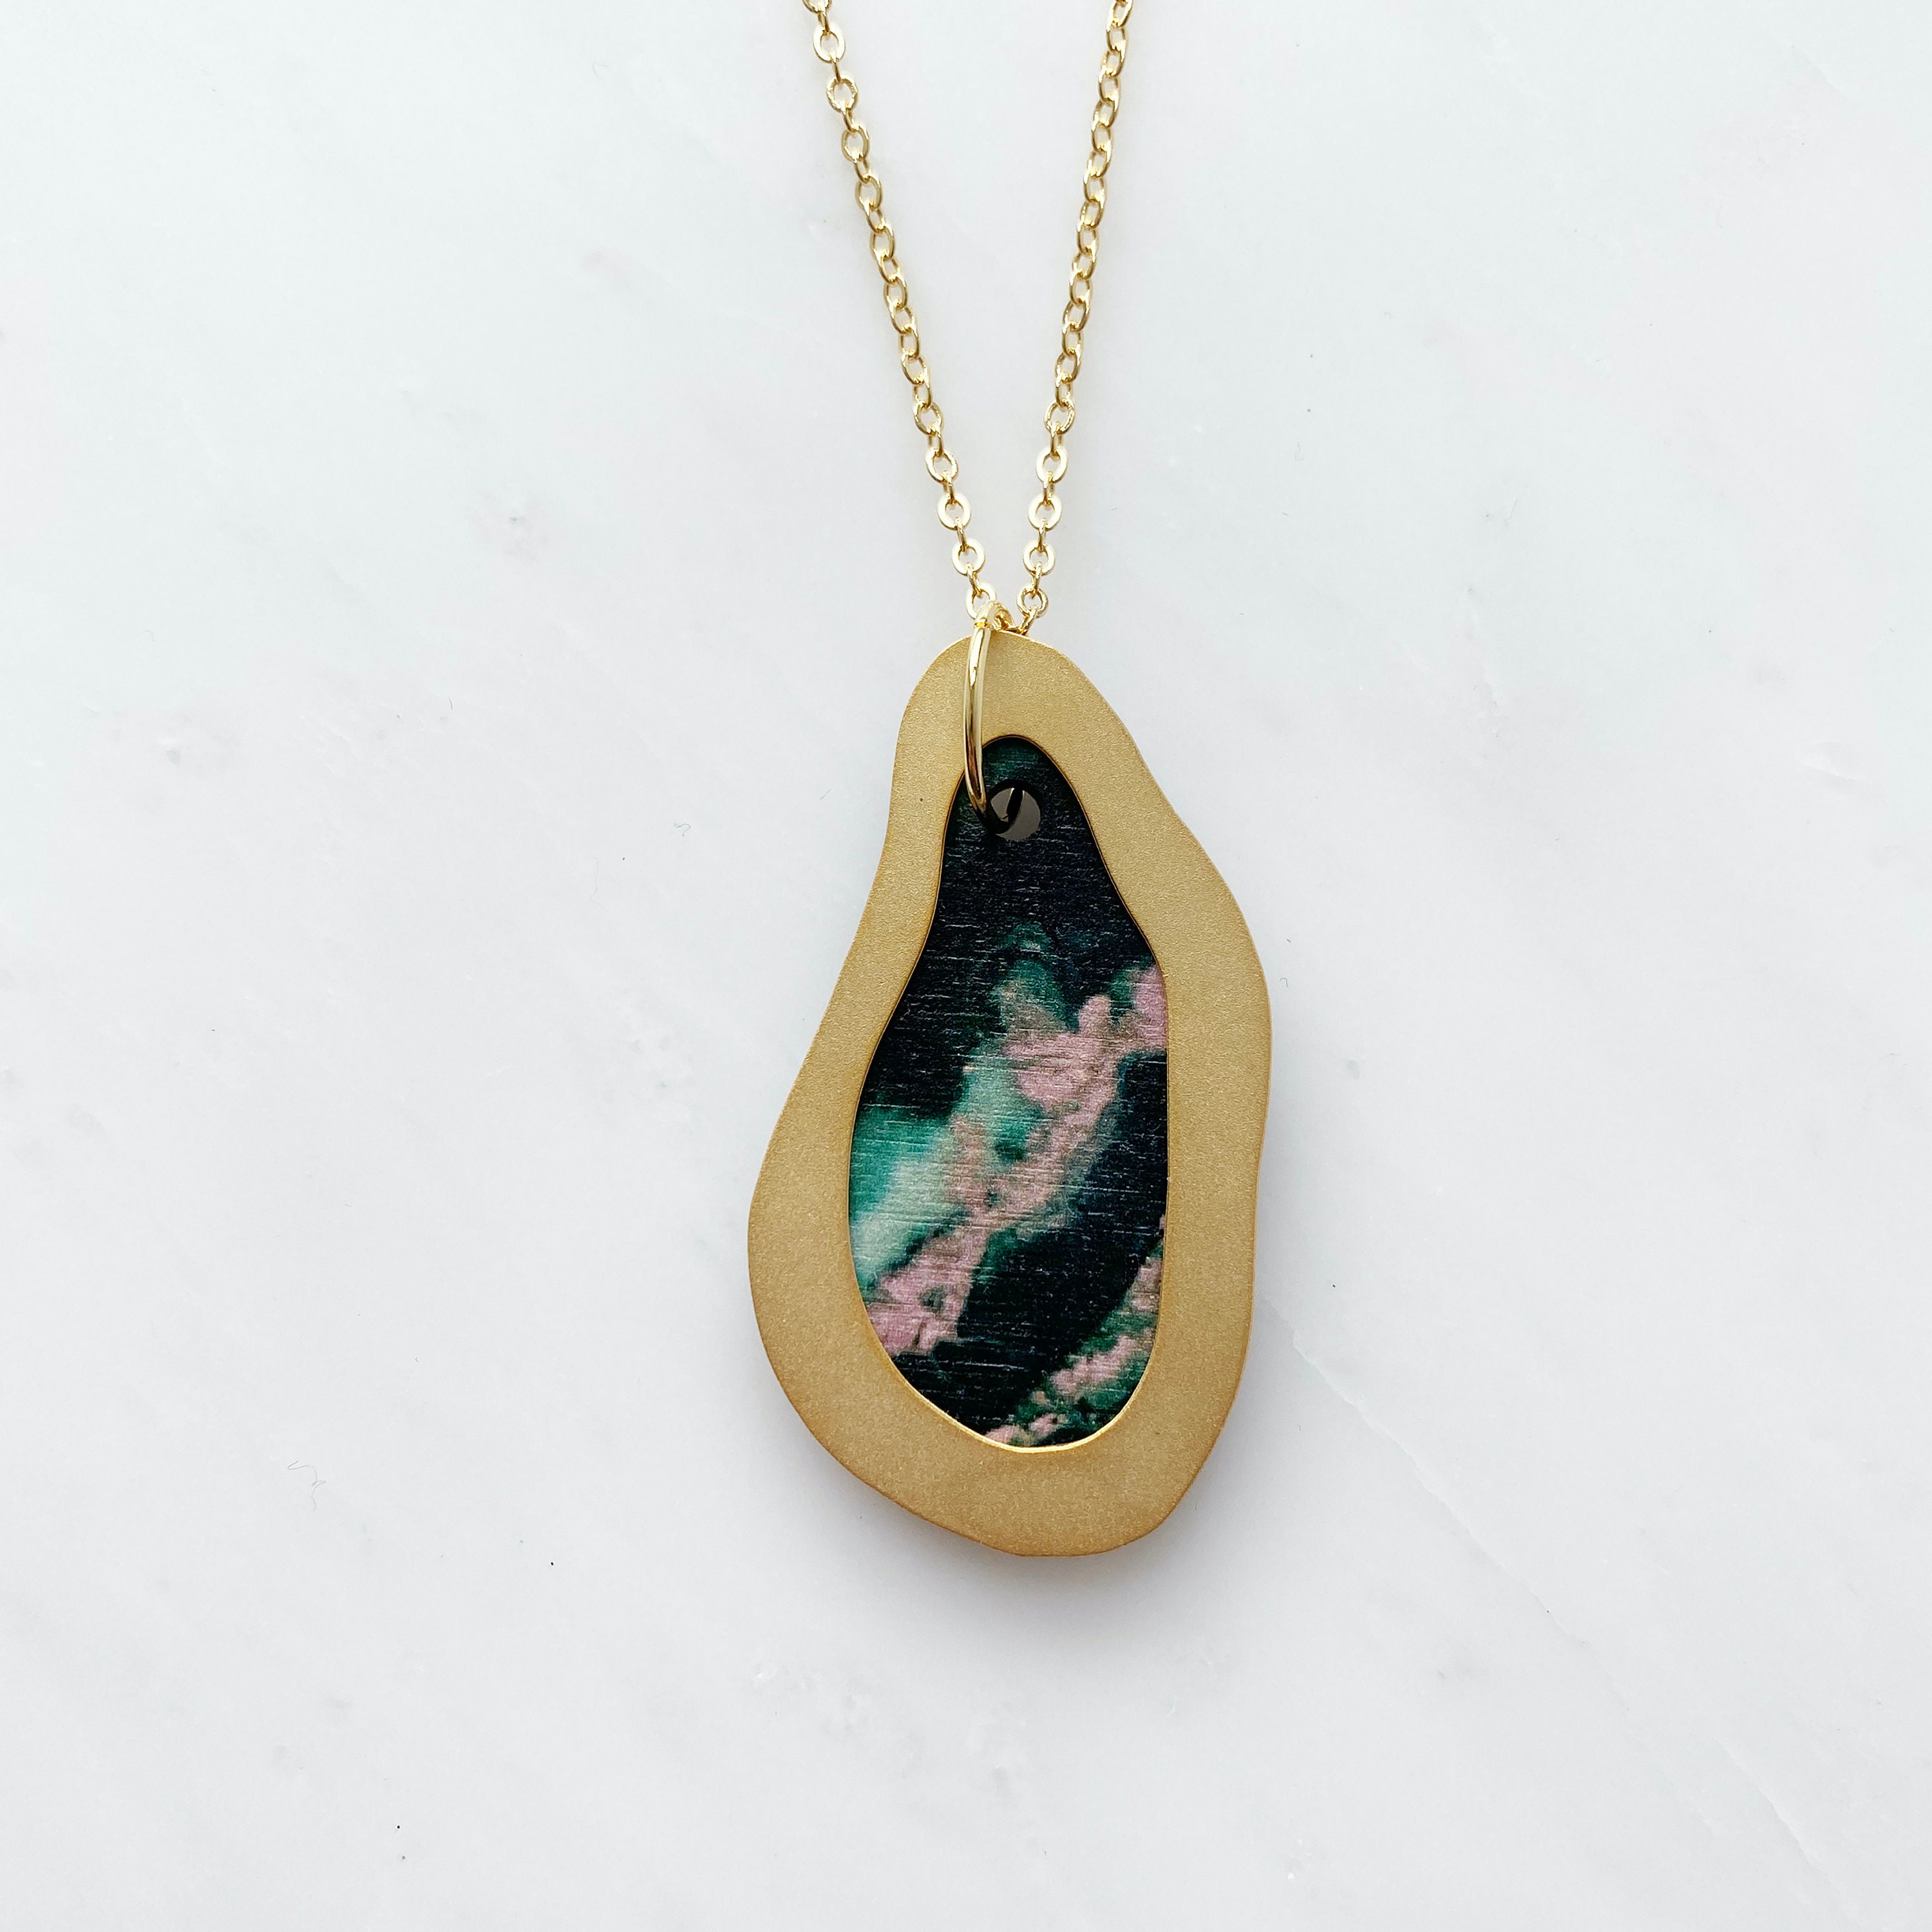 Green & Pink Marble Wavy Necklace - Geometric Modern Gift For Her